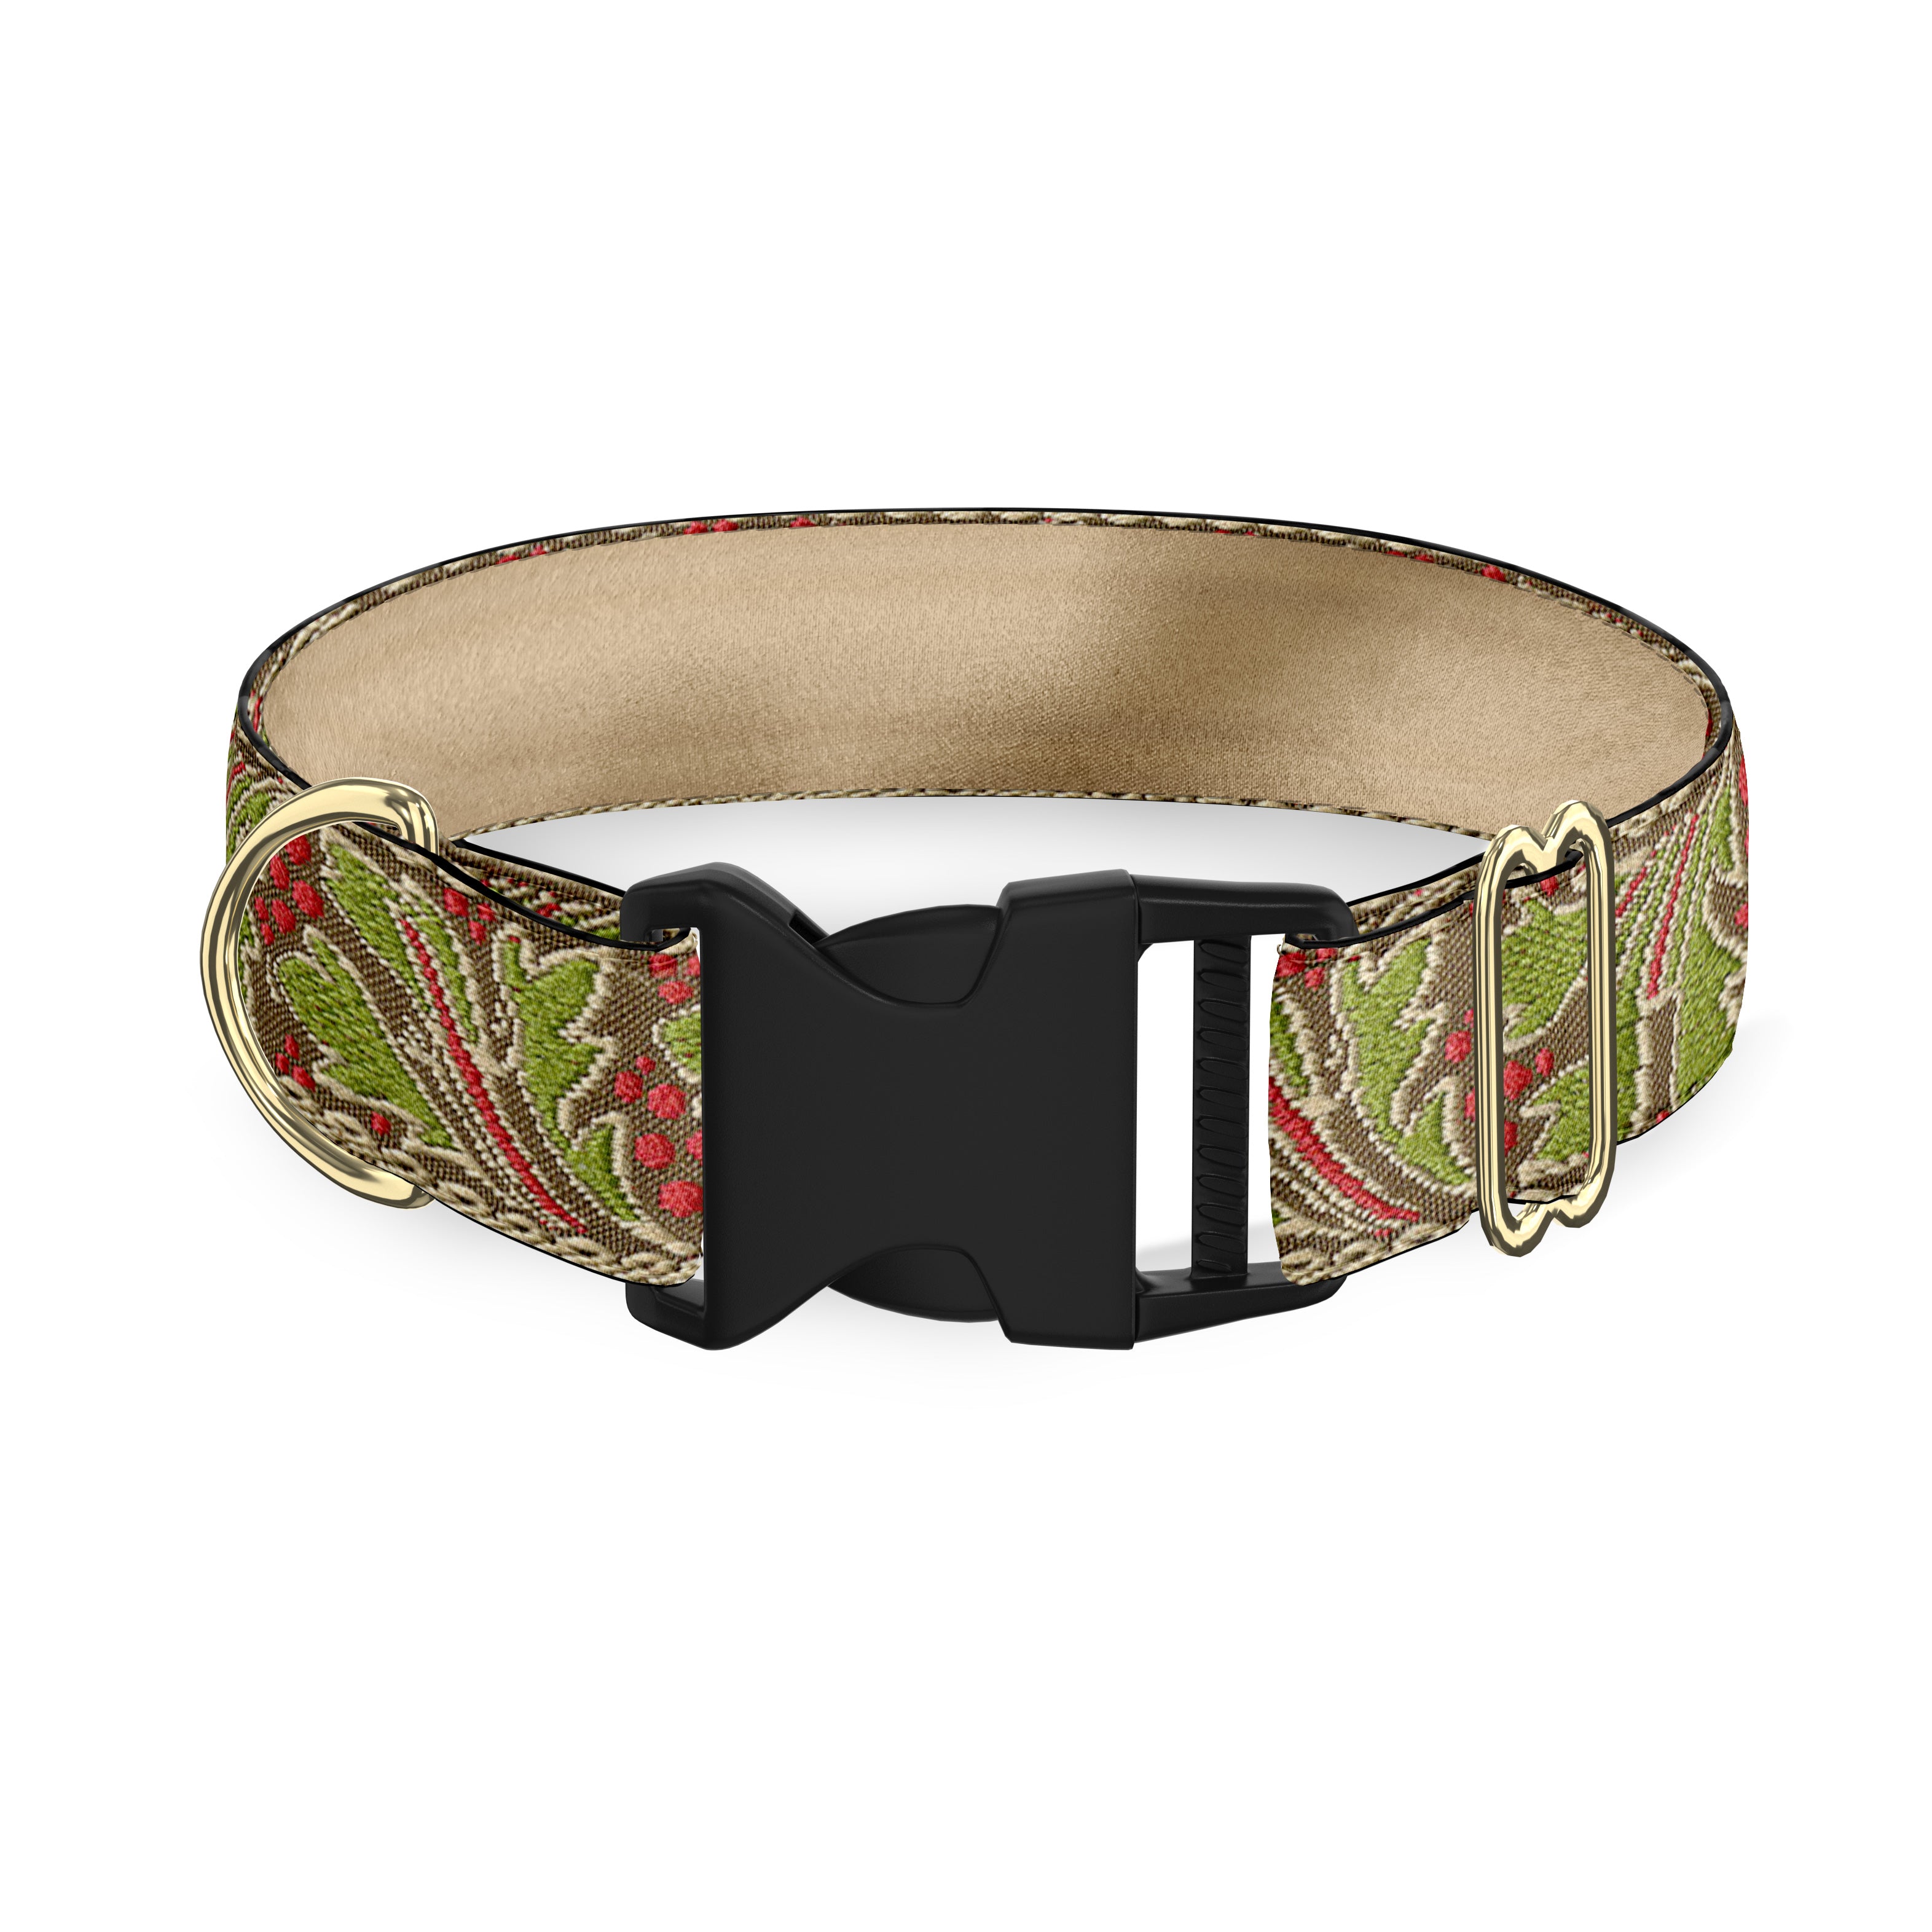 Courrier and Ives 1 Inch Dog Collar